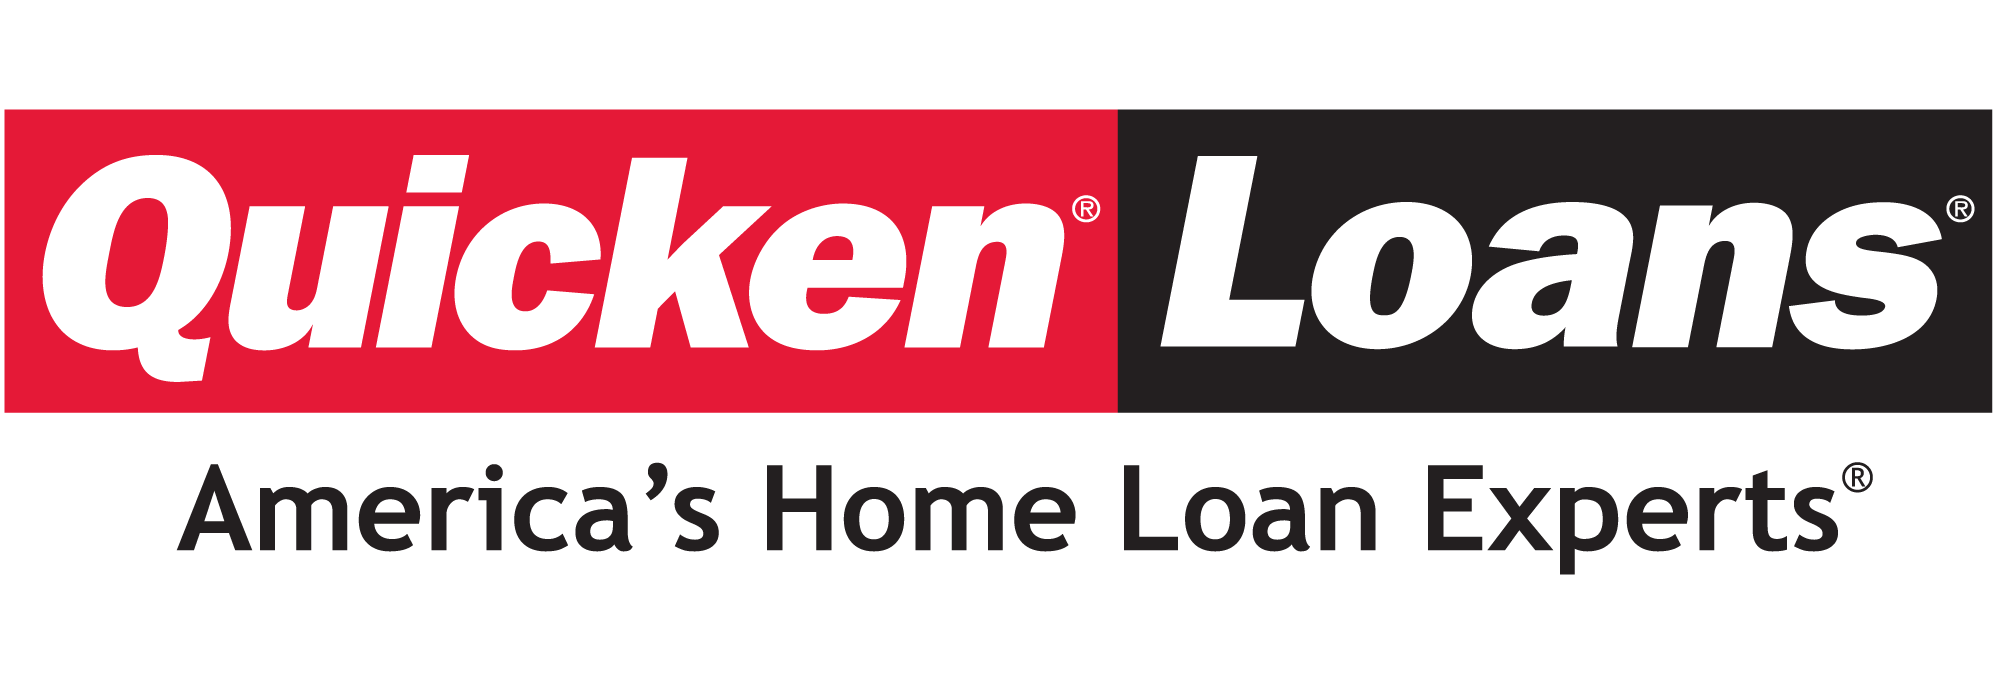 Mortgage Analytics with Quicken Loans